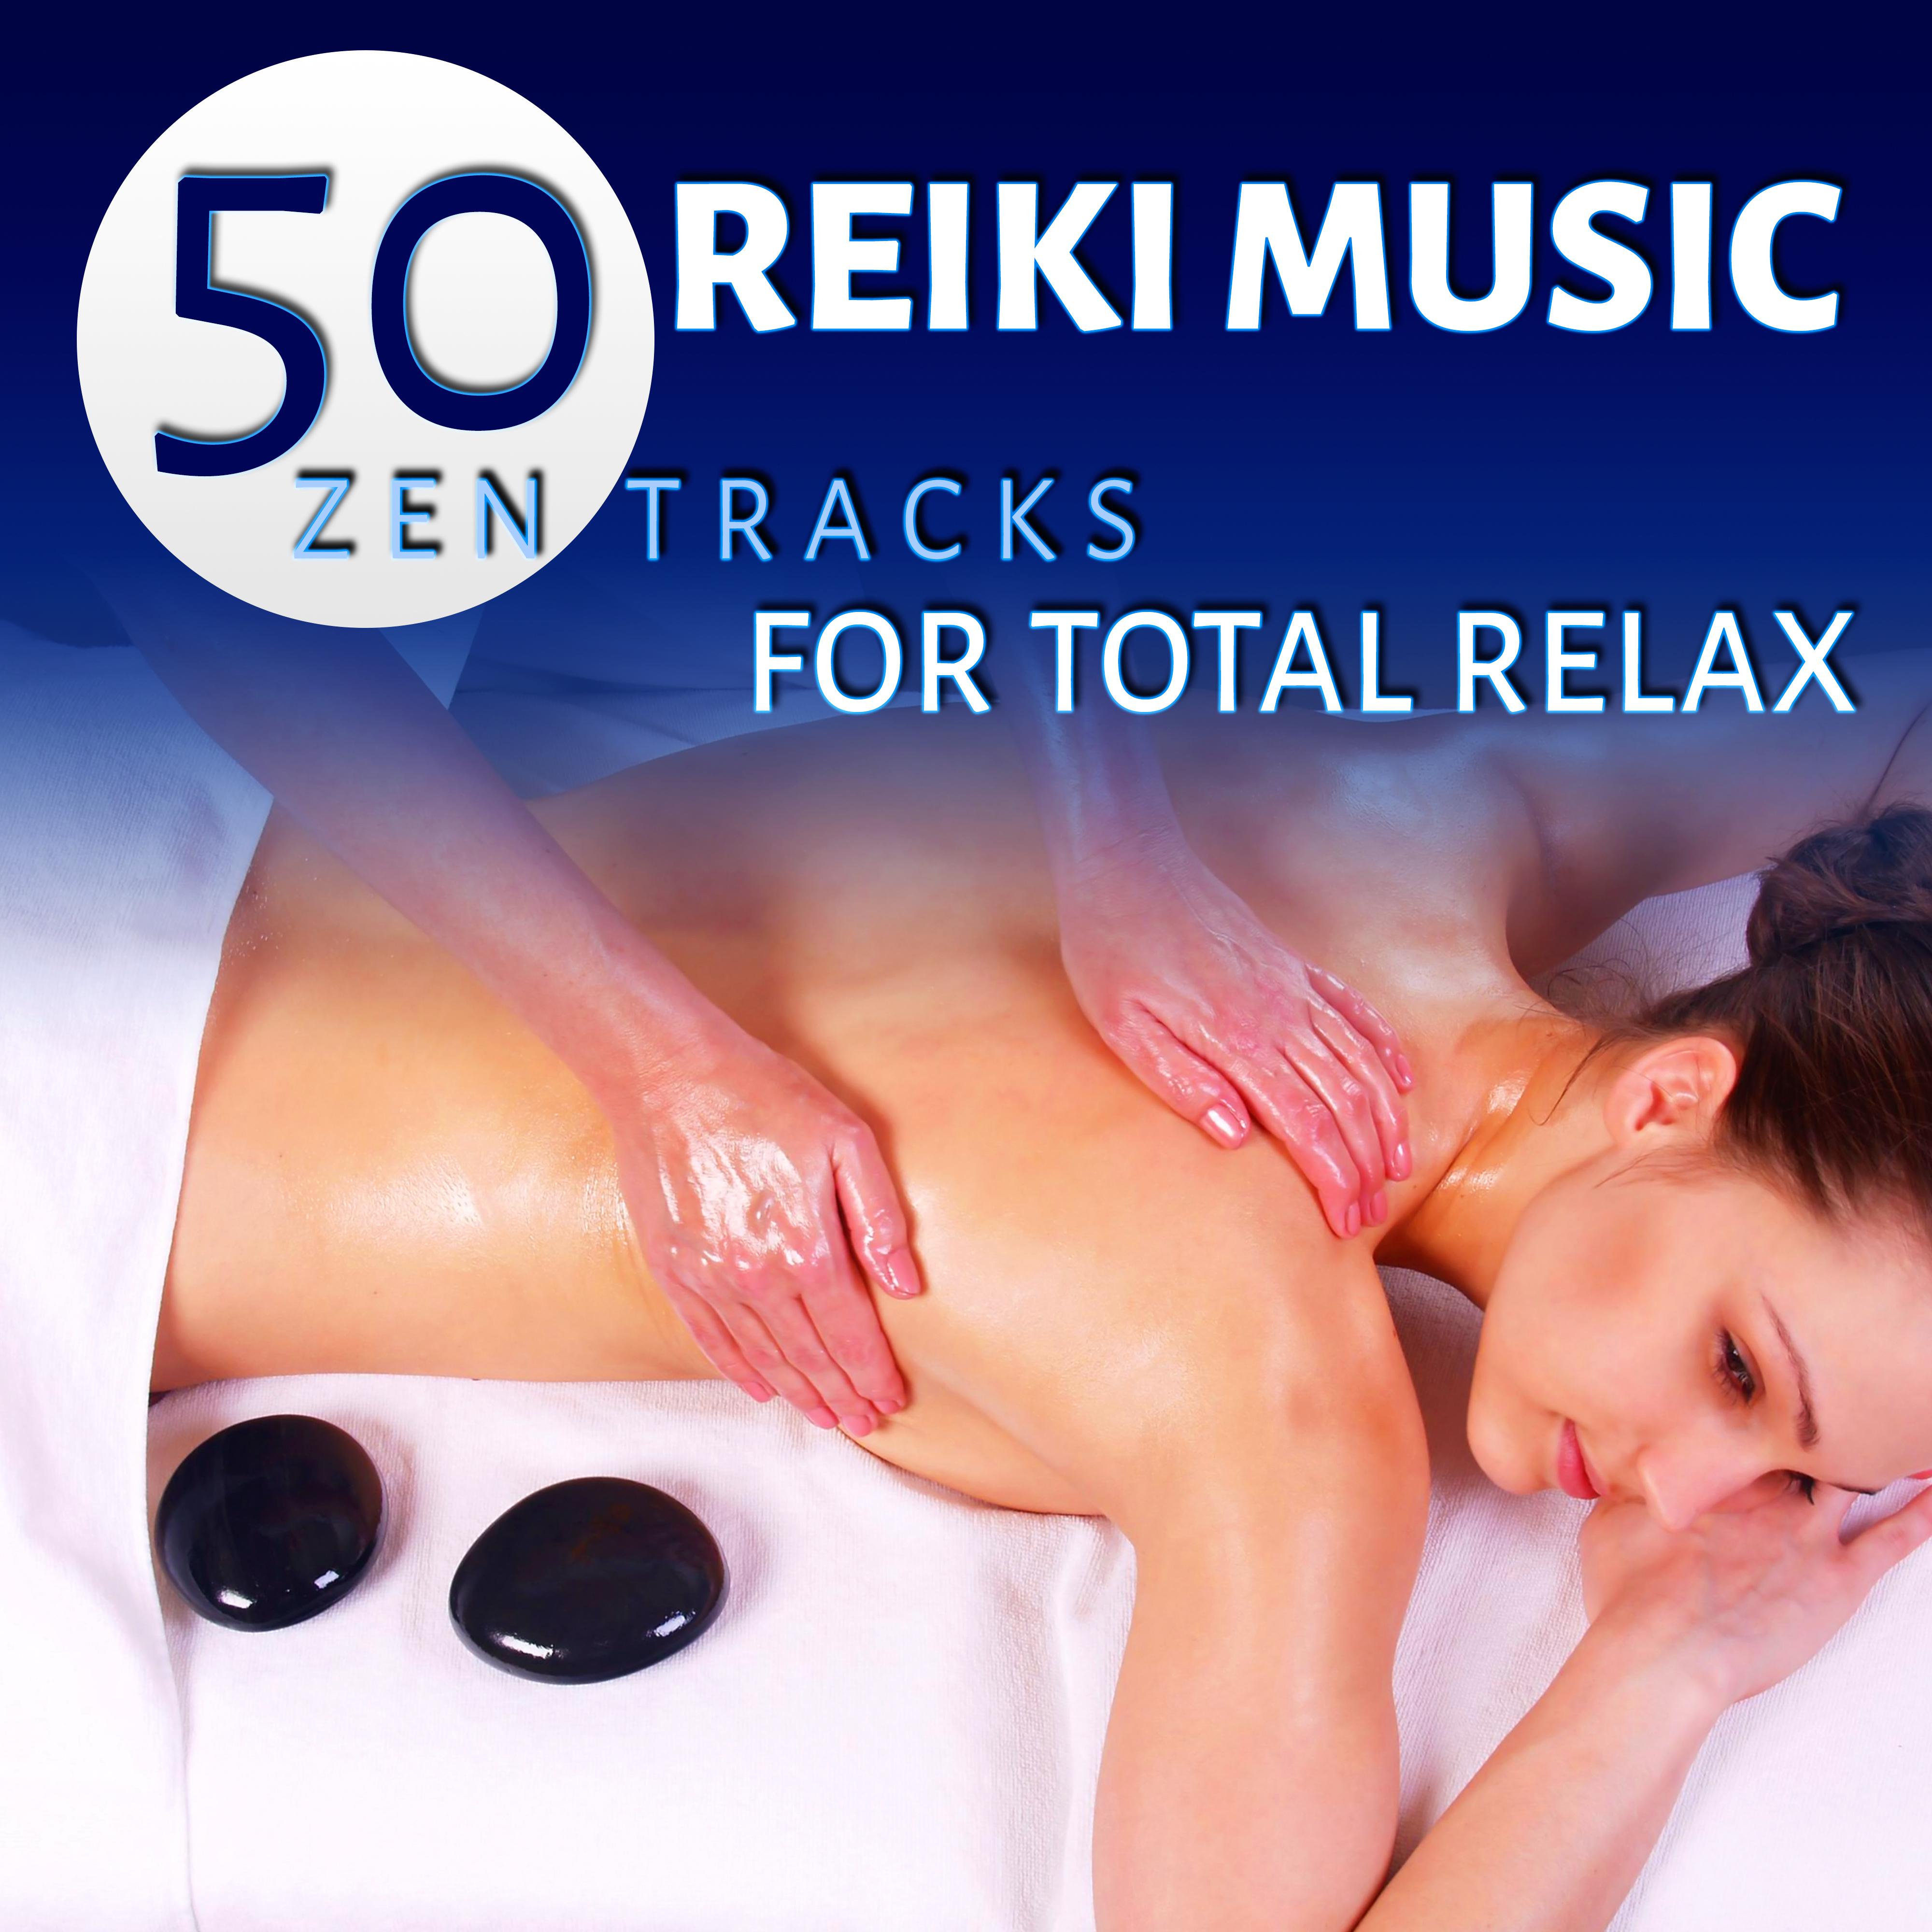 Reiki Music - 50 Zen Tracks for Total Relax, Music for Sleep, Relaxation, Meditation and Yoga, New Age Music, Wellness, Serenity, Music for Depression and Anxiety